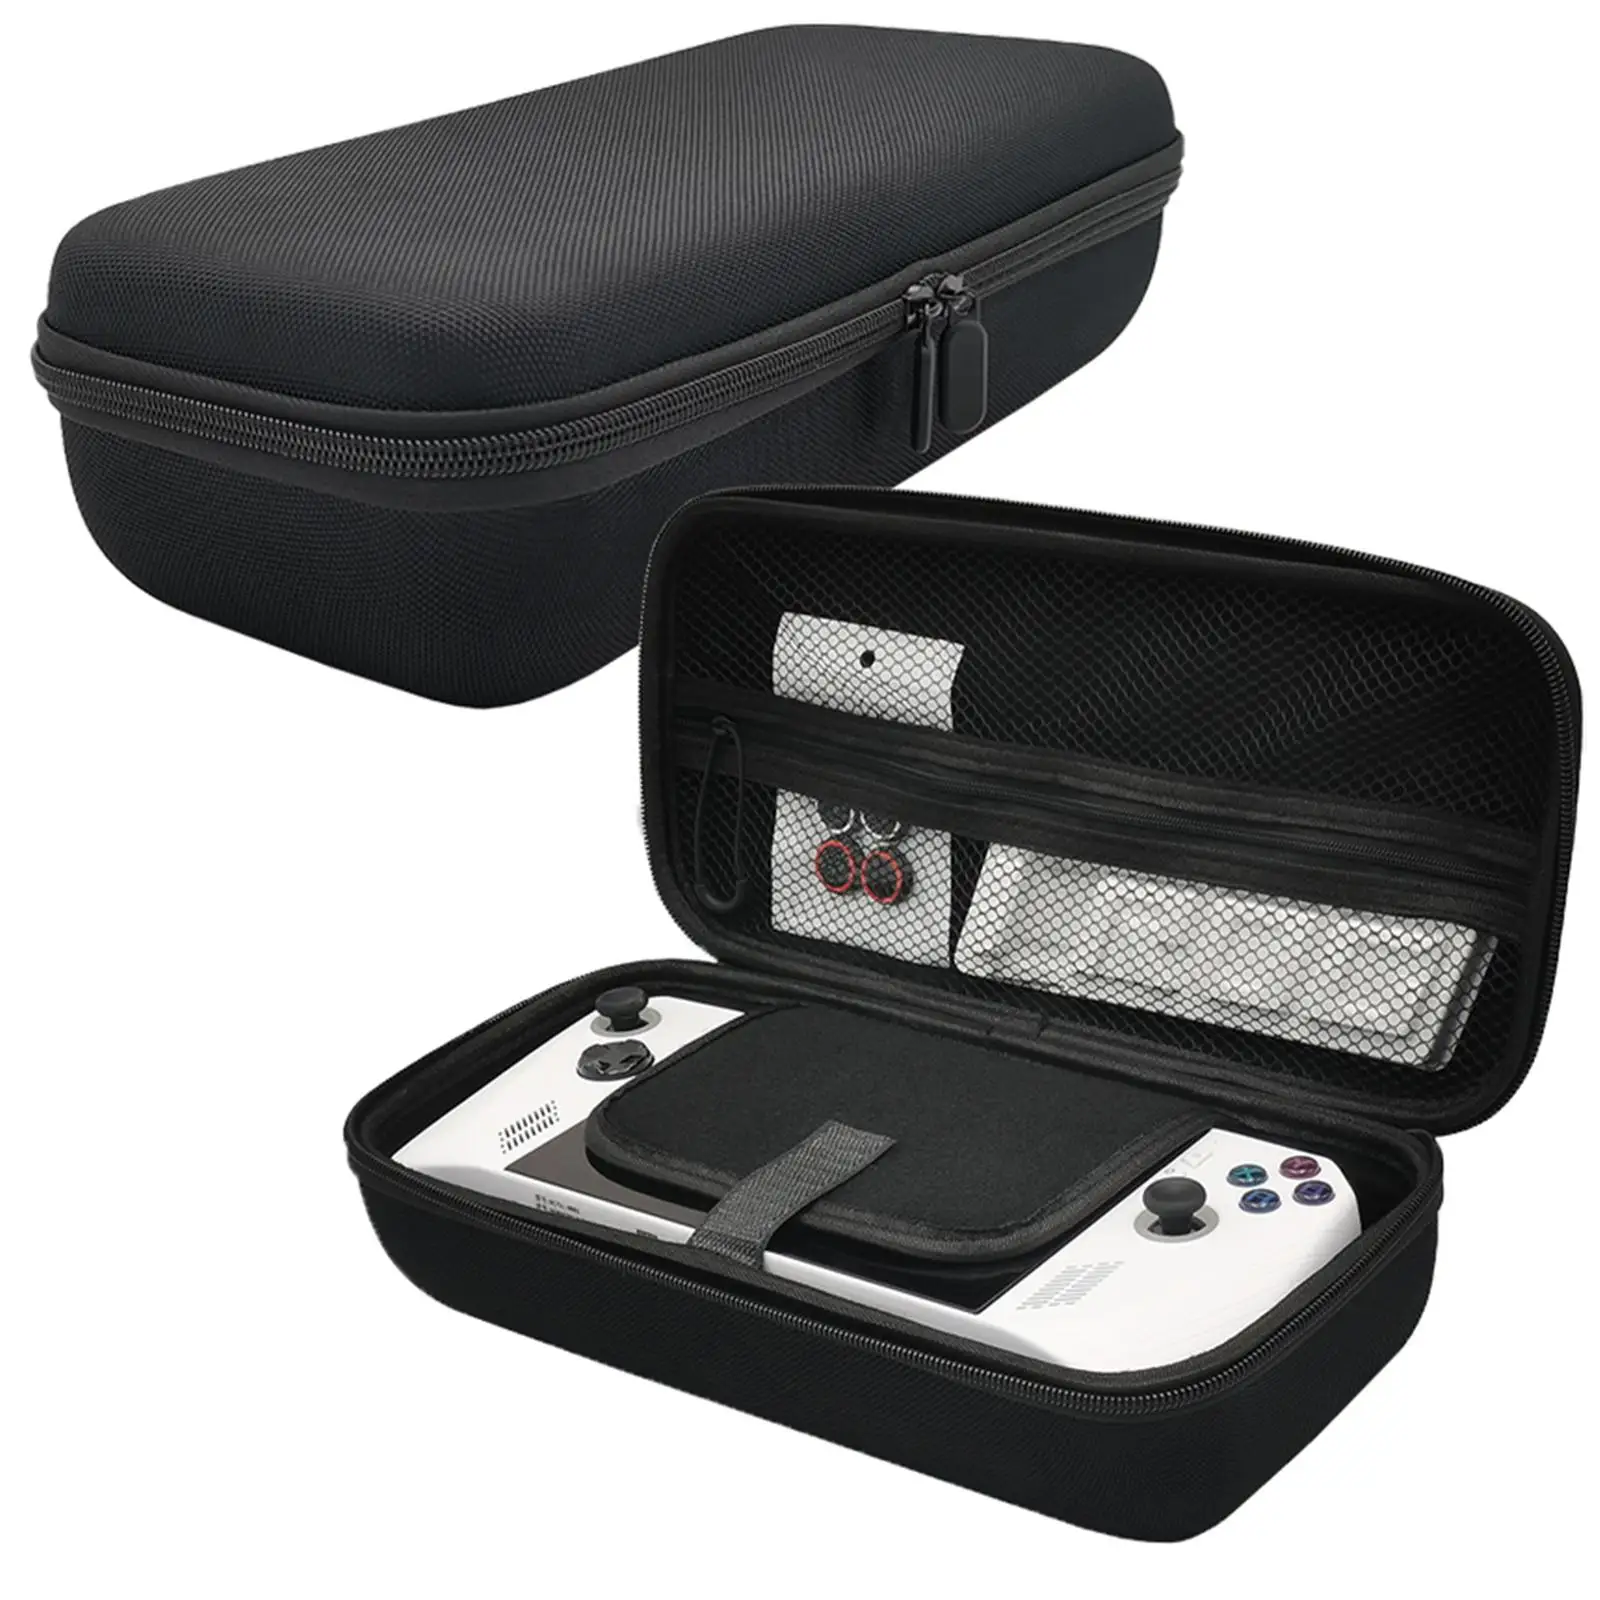 Handheld Game Console Carrying Case Easy to Carry Organizer Storage Case Game Machine Accessories Portable Shockproof Hard Shell